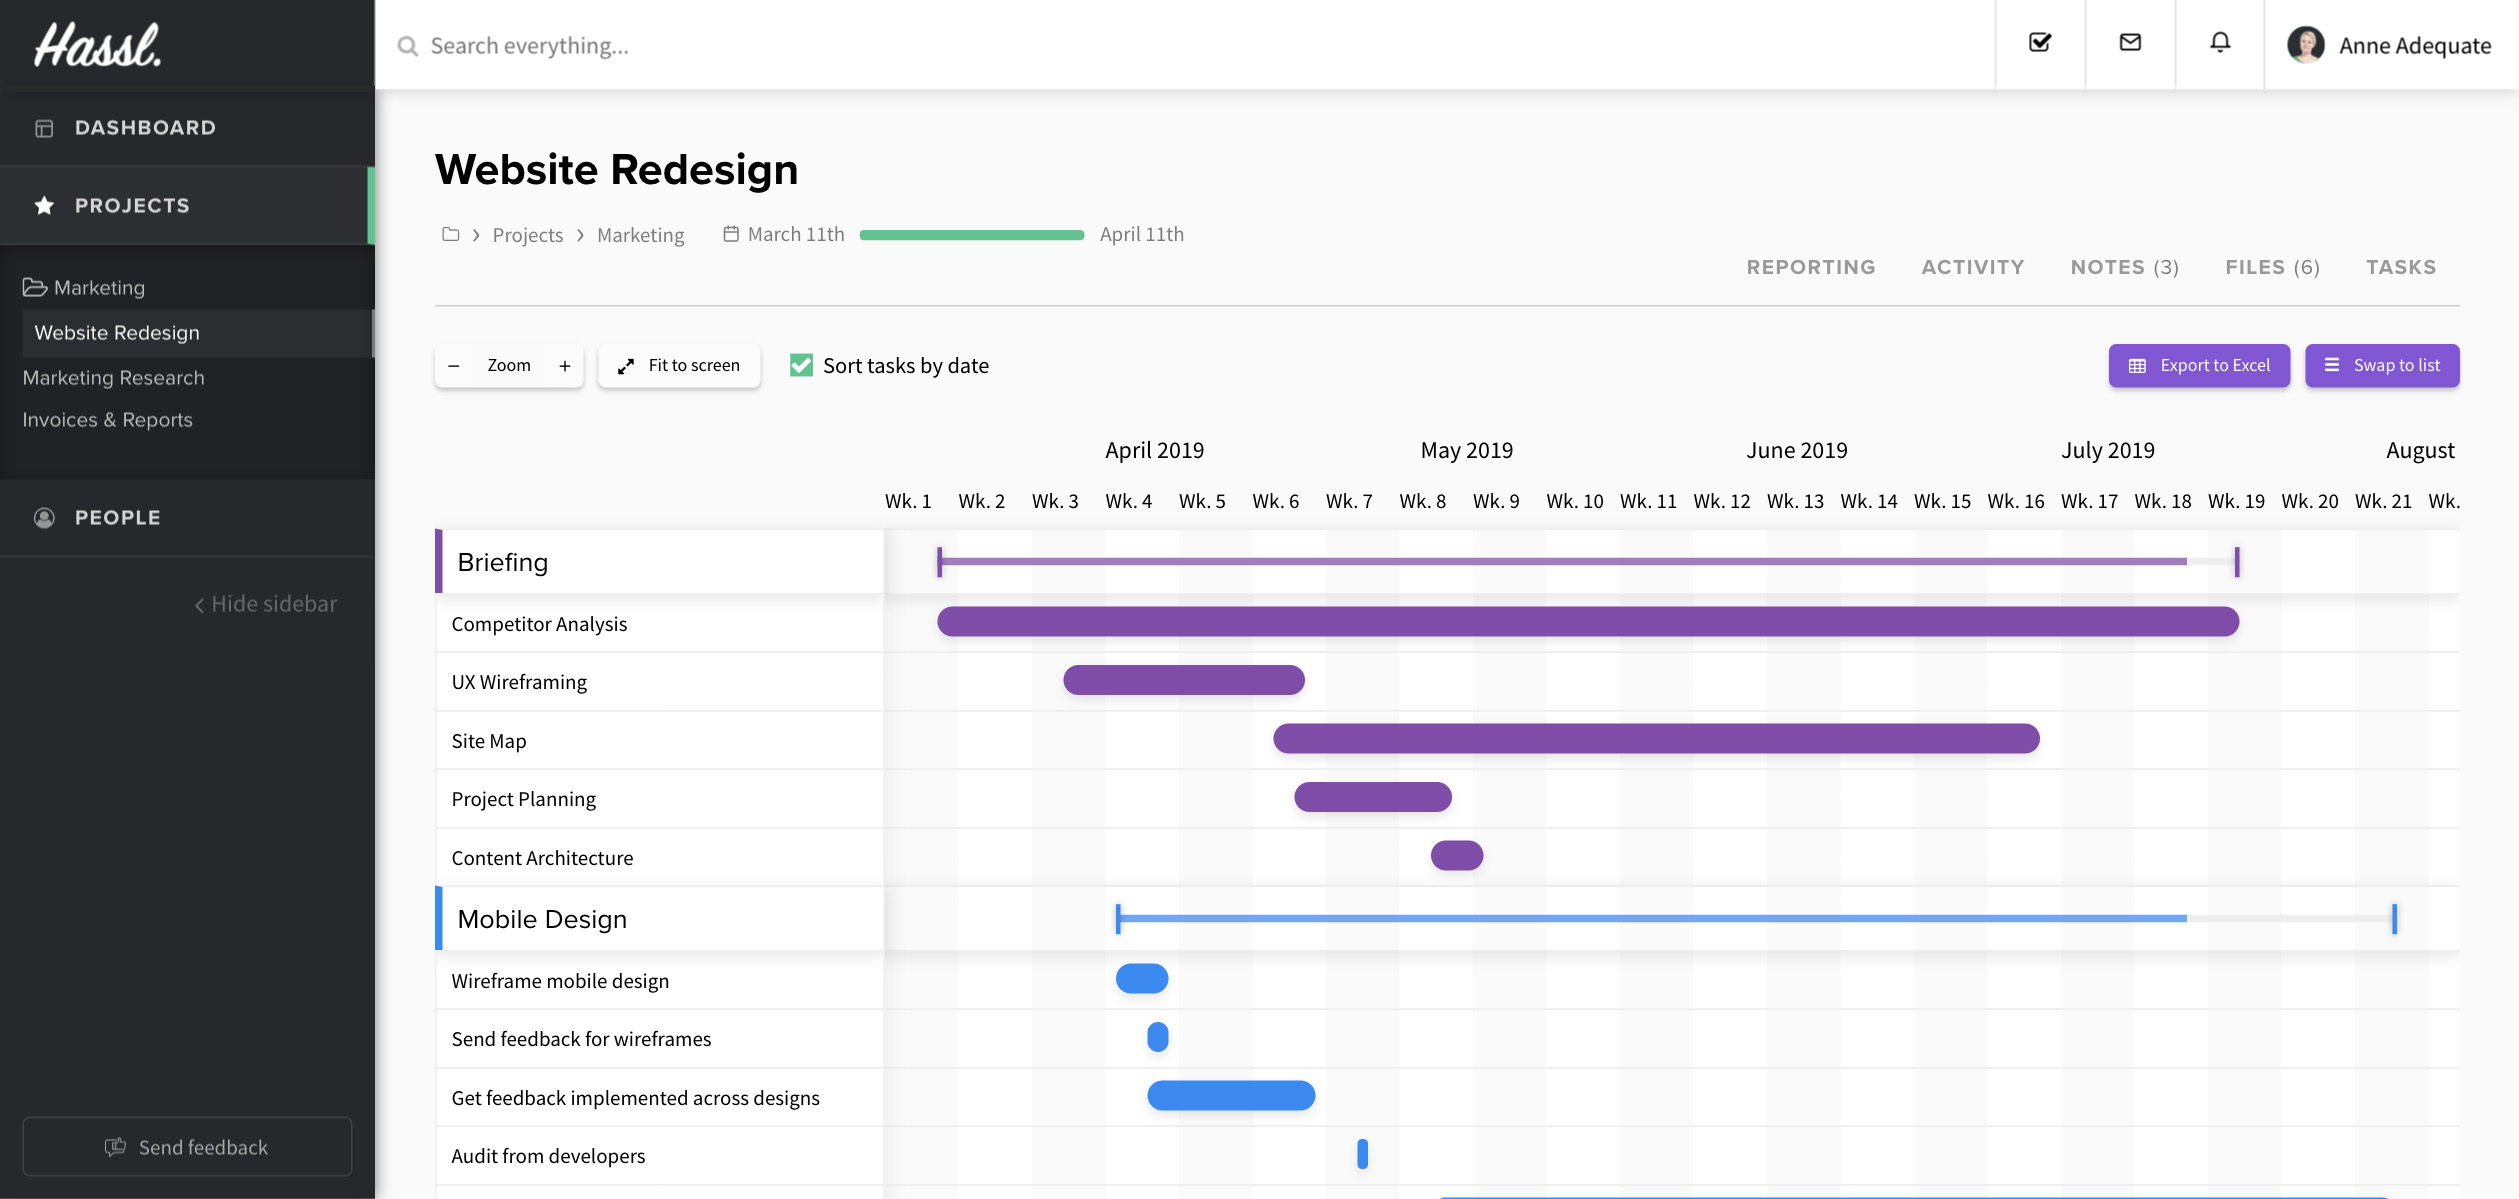 Project Timeline View